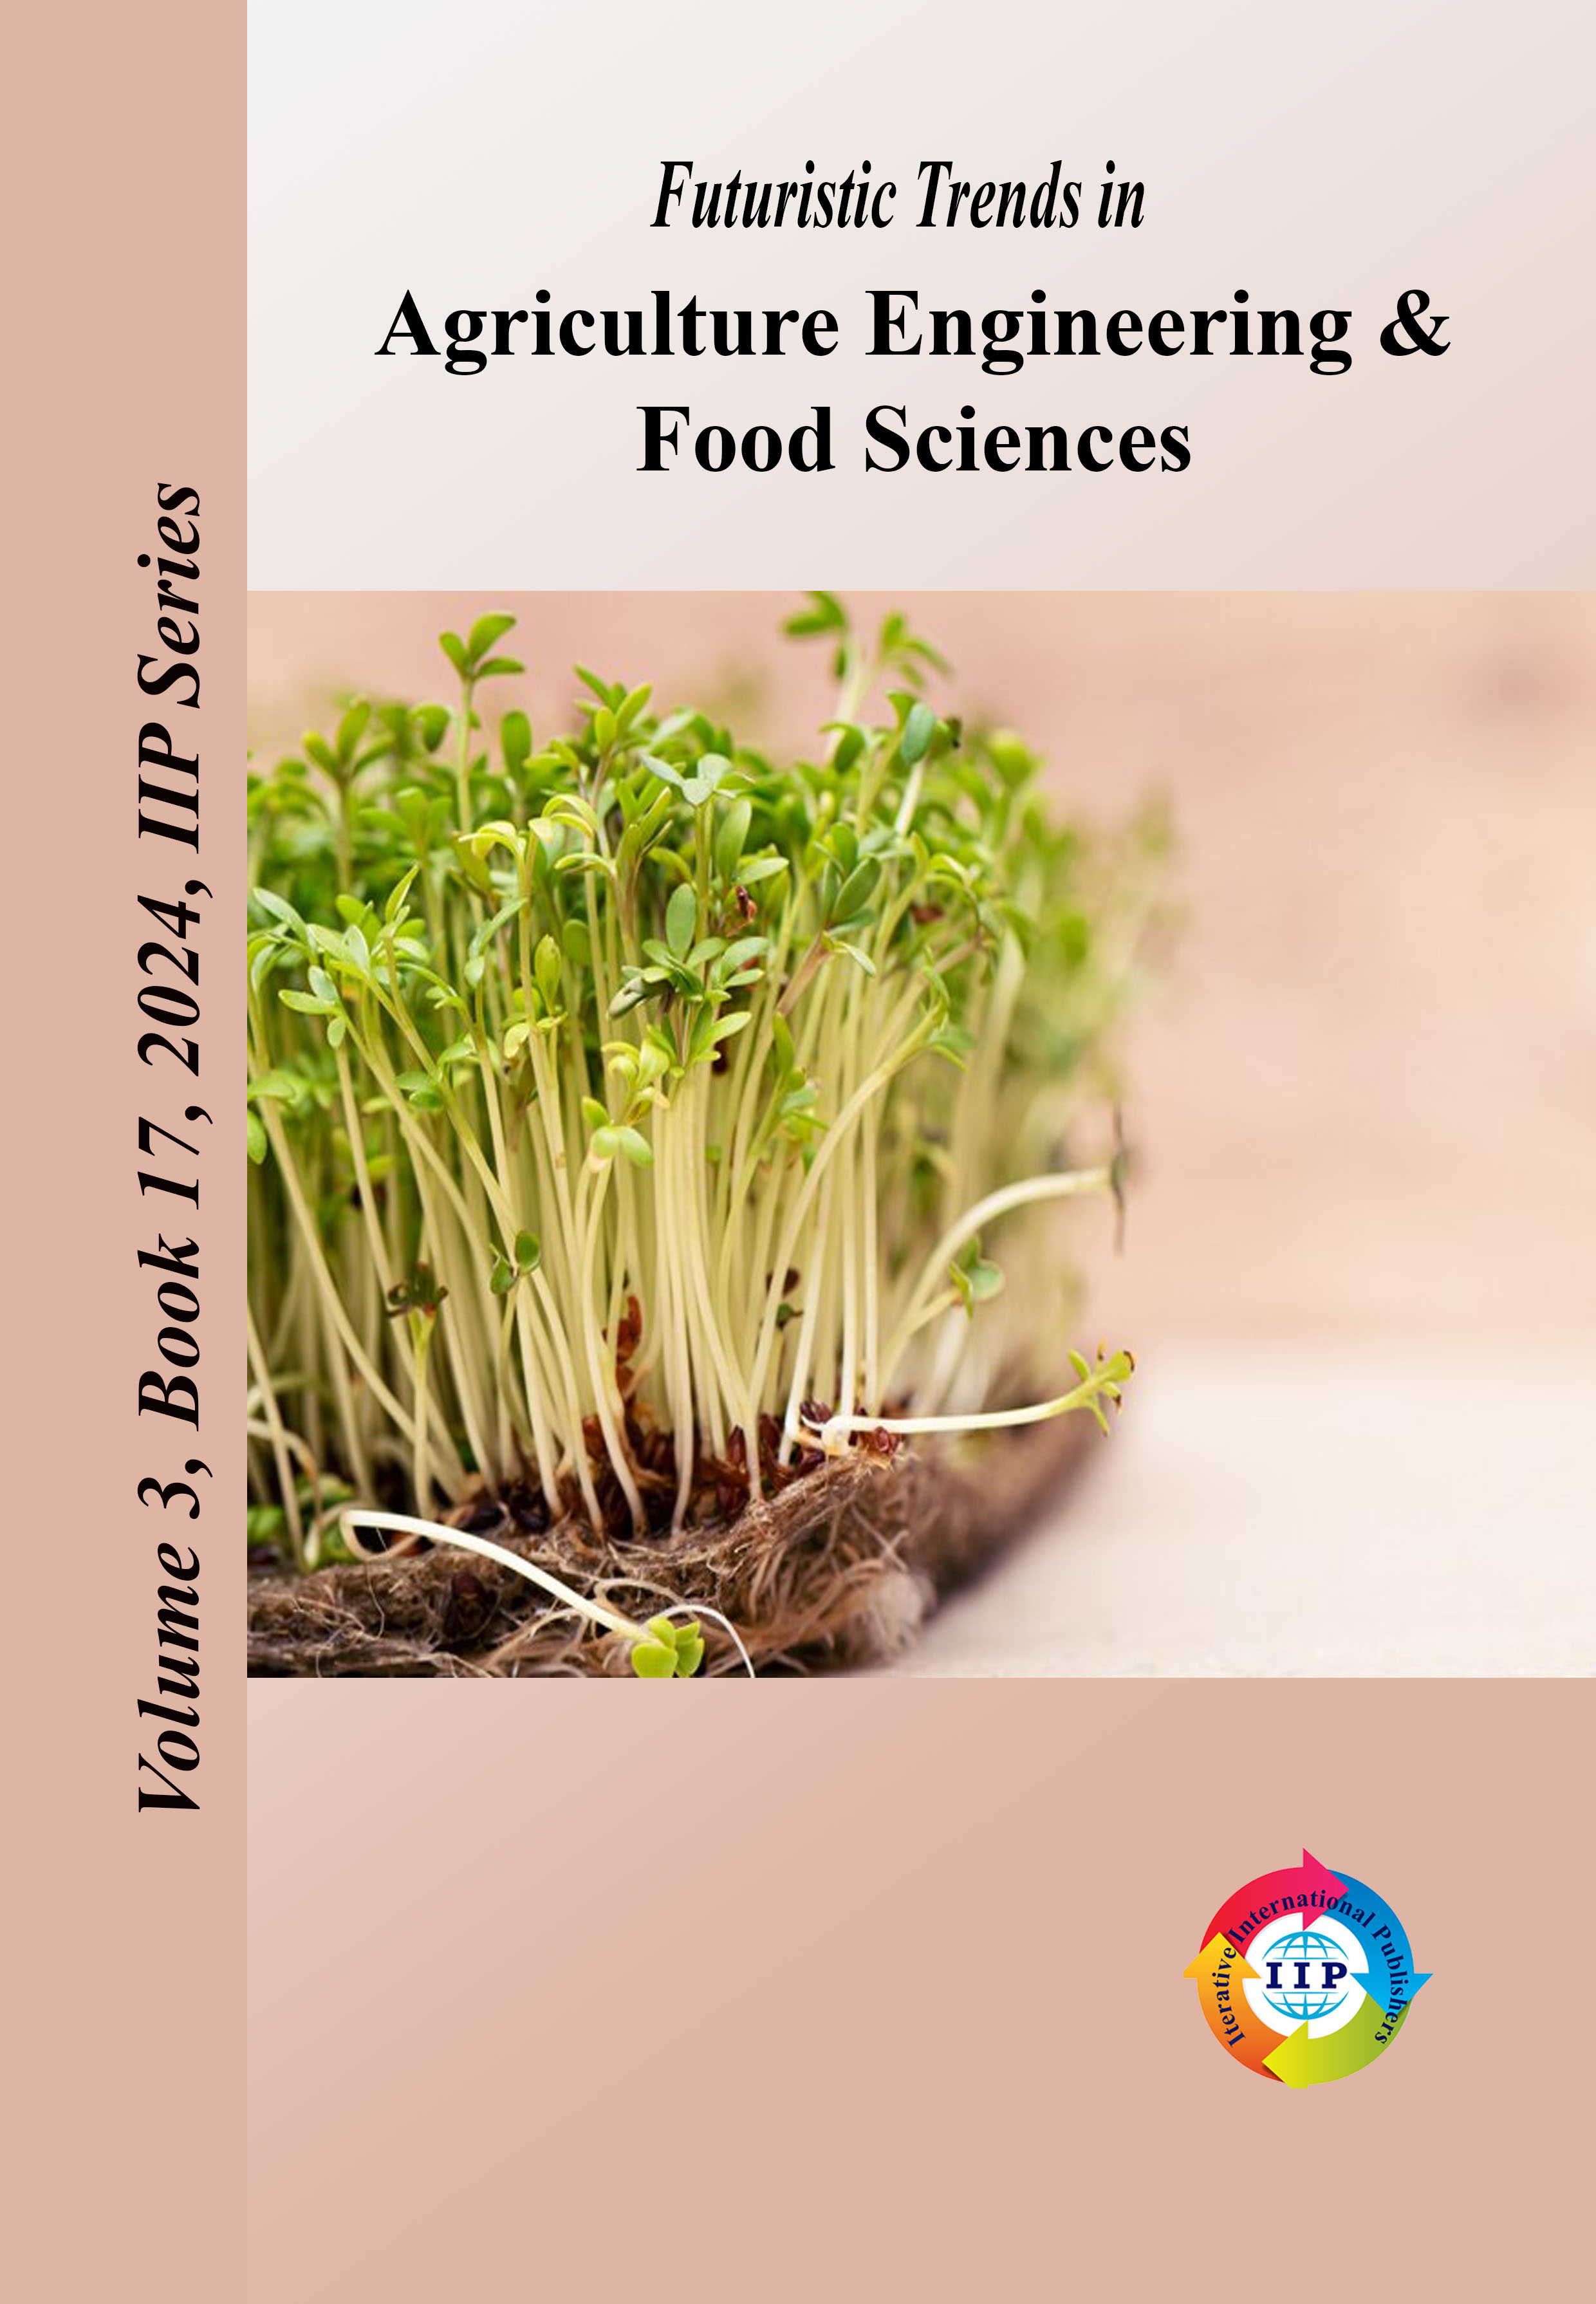 Futuristic Trends in Agriculture Engineering & Food Sciences Volume 3 Book 17